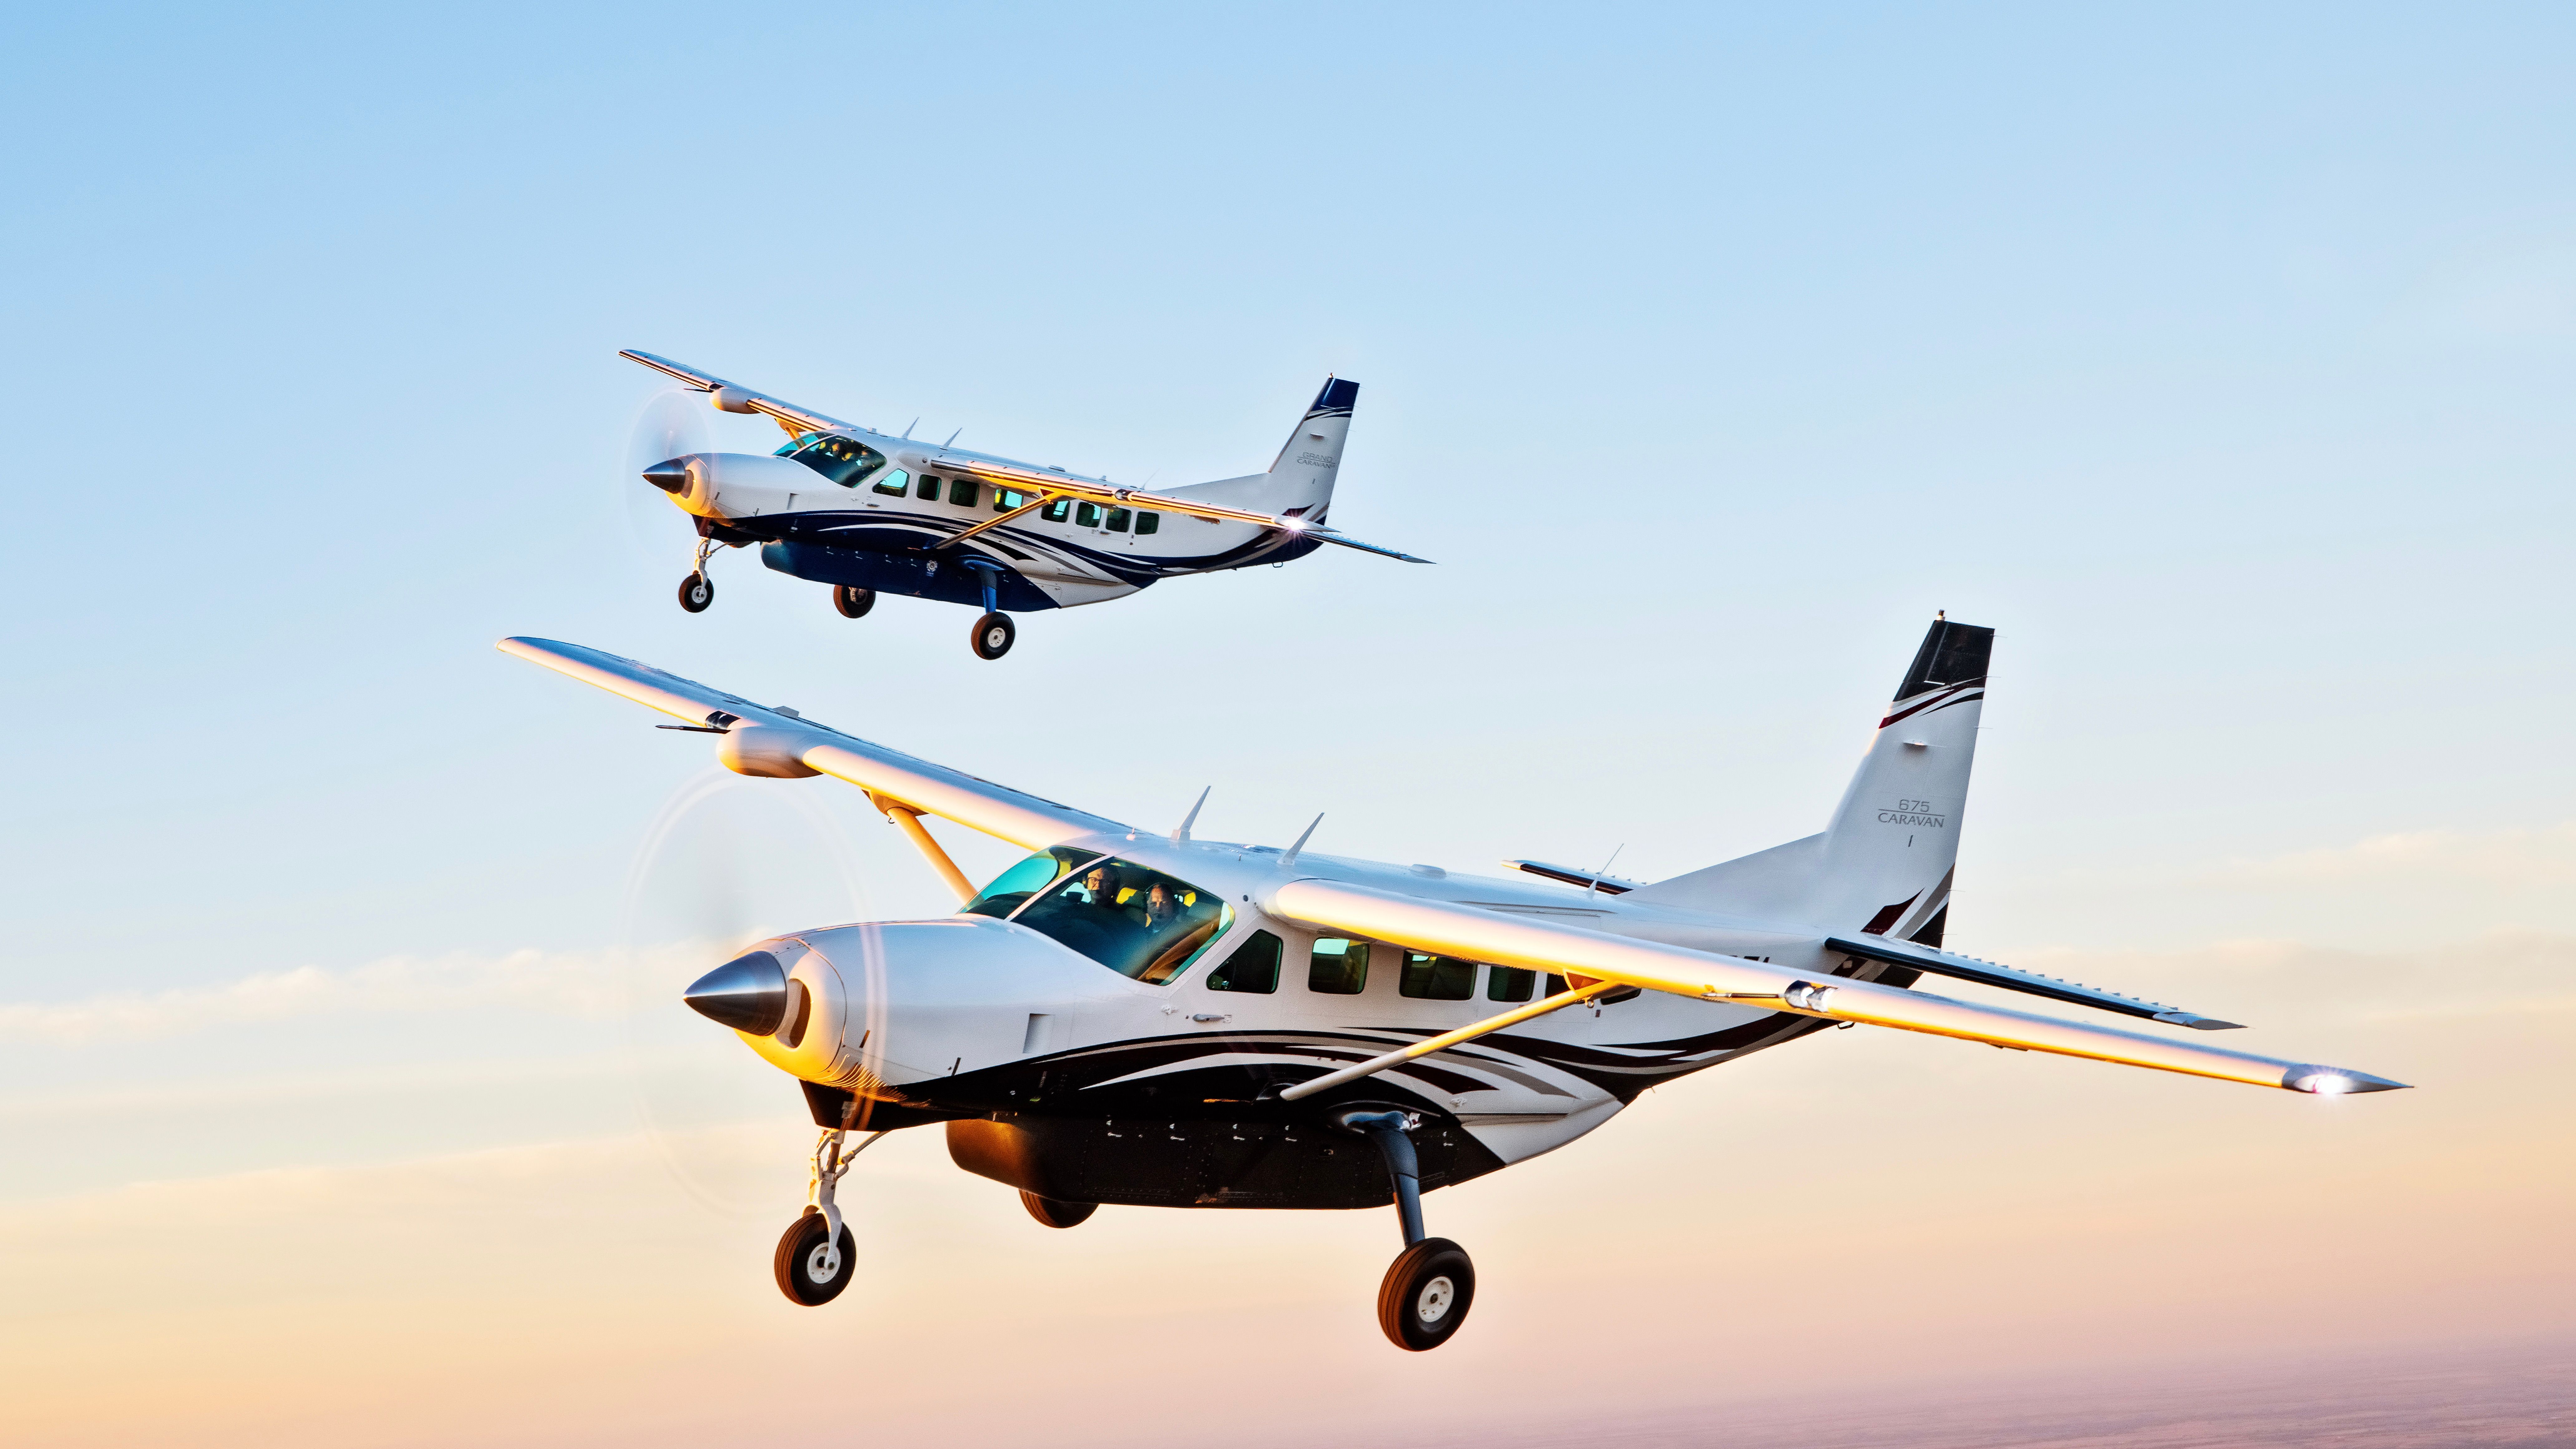 Two Cessna Caravan 208s flying in the sky in formation.